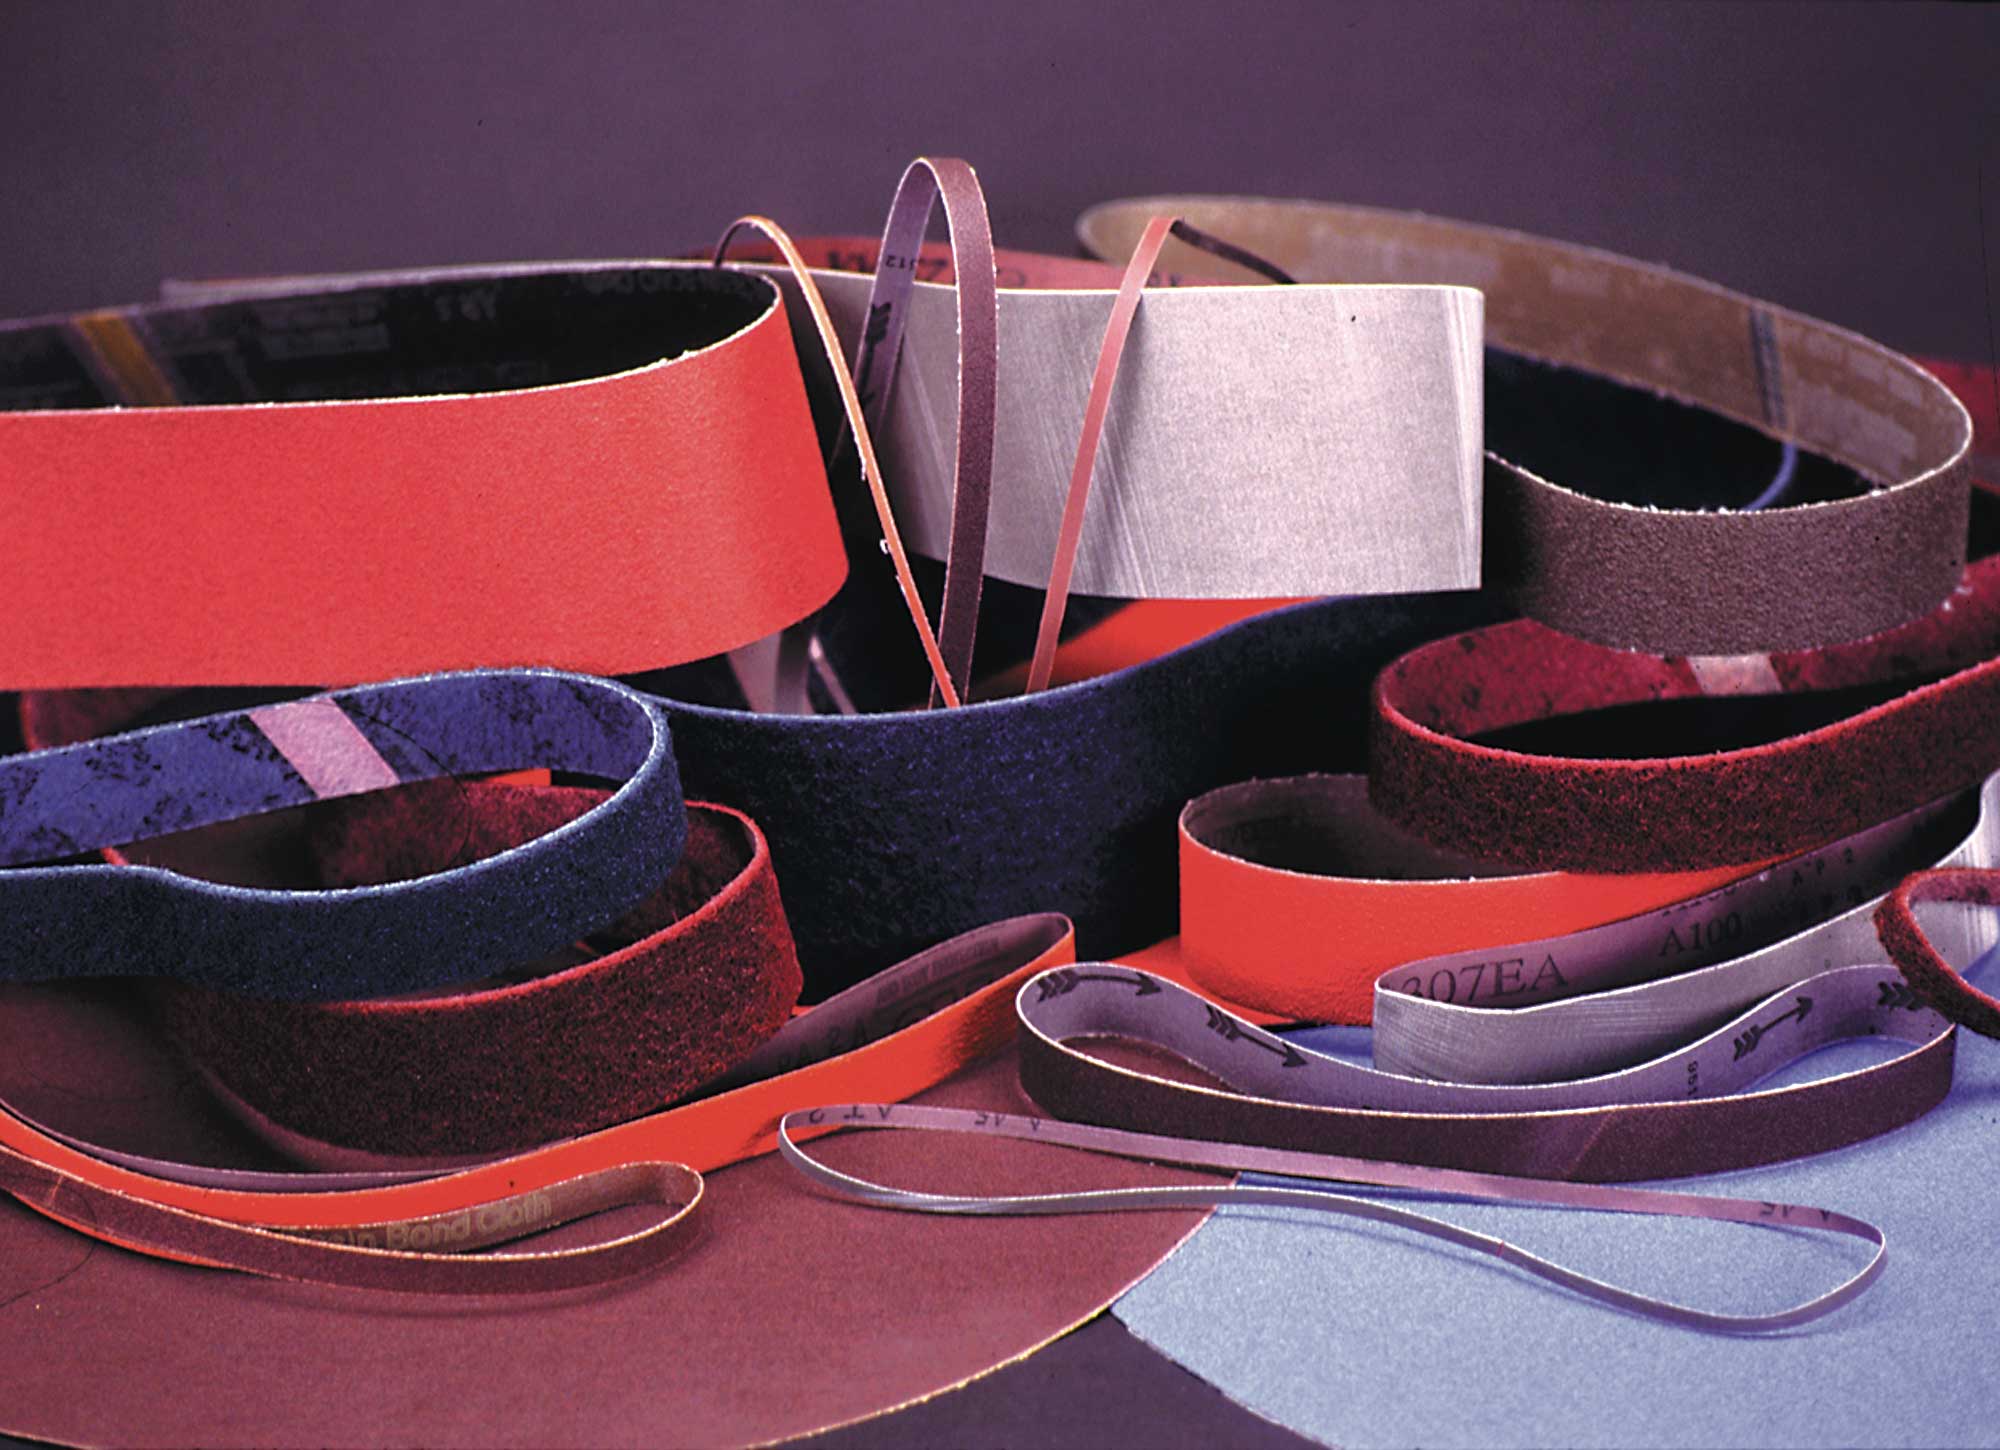 Abrasive belts of all sizes available for your belt grinder